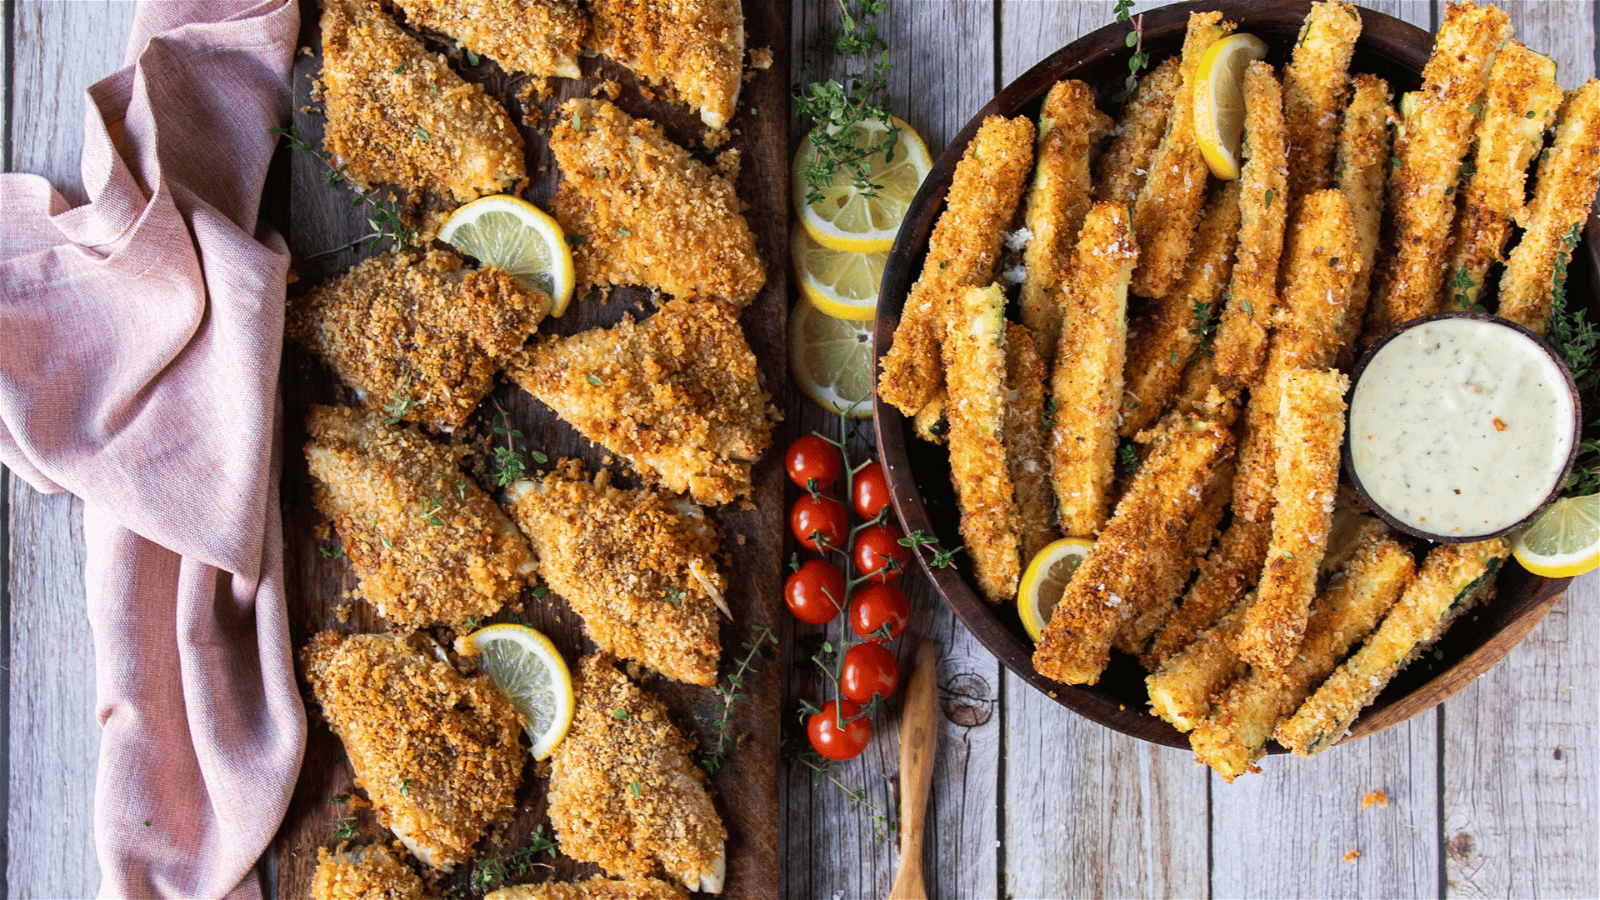 Image of Parmesan Baked Perch With Zucchini Fries